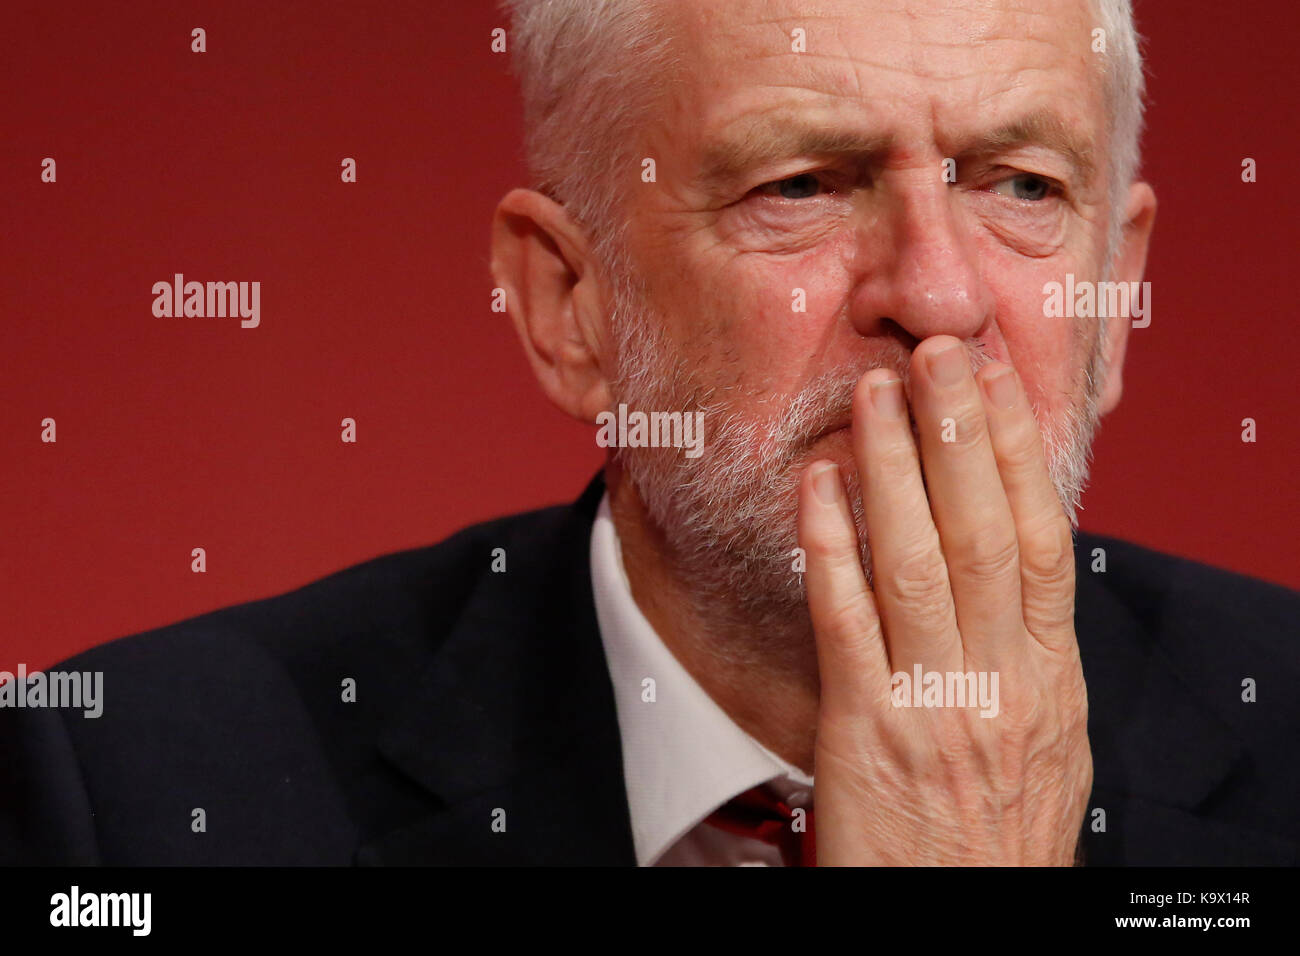 Brighton, UK. 24th September, 2017. Jeremy Corbyn, leader of Britain's opposition Labour party touches his face during the annual Labour Party Conference in Brighton, UK Sunday, September 24, 2017. Photograph : Credit: Luke MacGregor/Alamy Live News Stock Photo